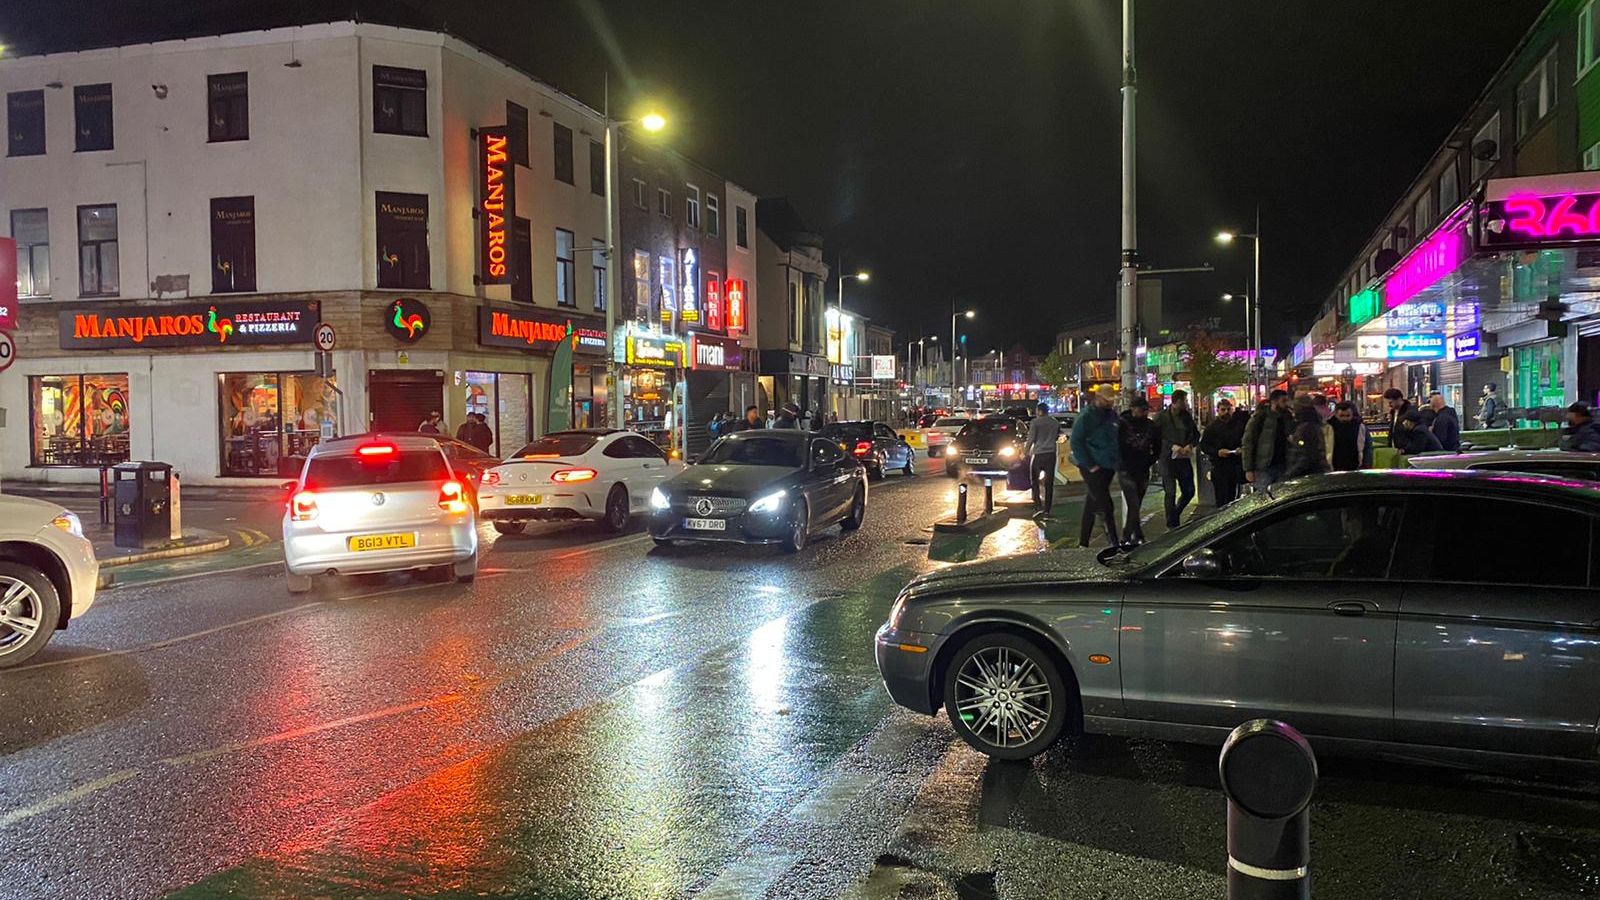 Bars and restaurants on Manchester's so-called Curry Mile were full on Friday night